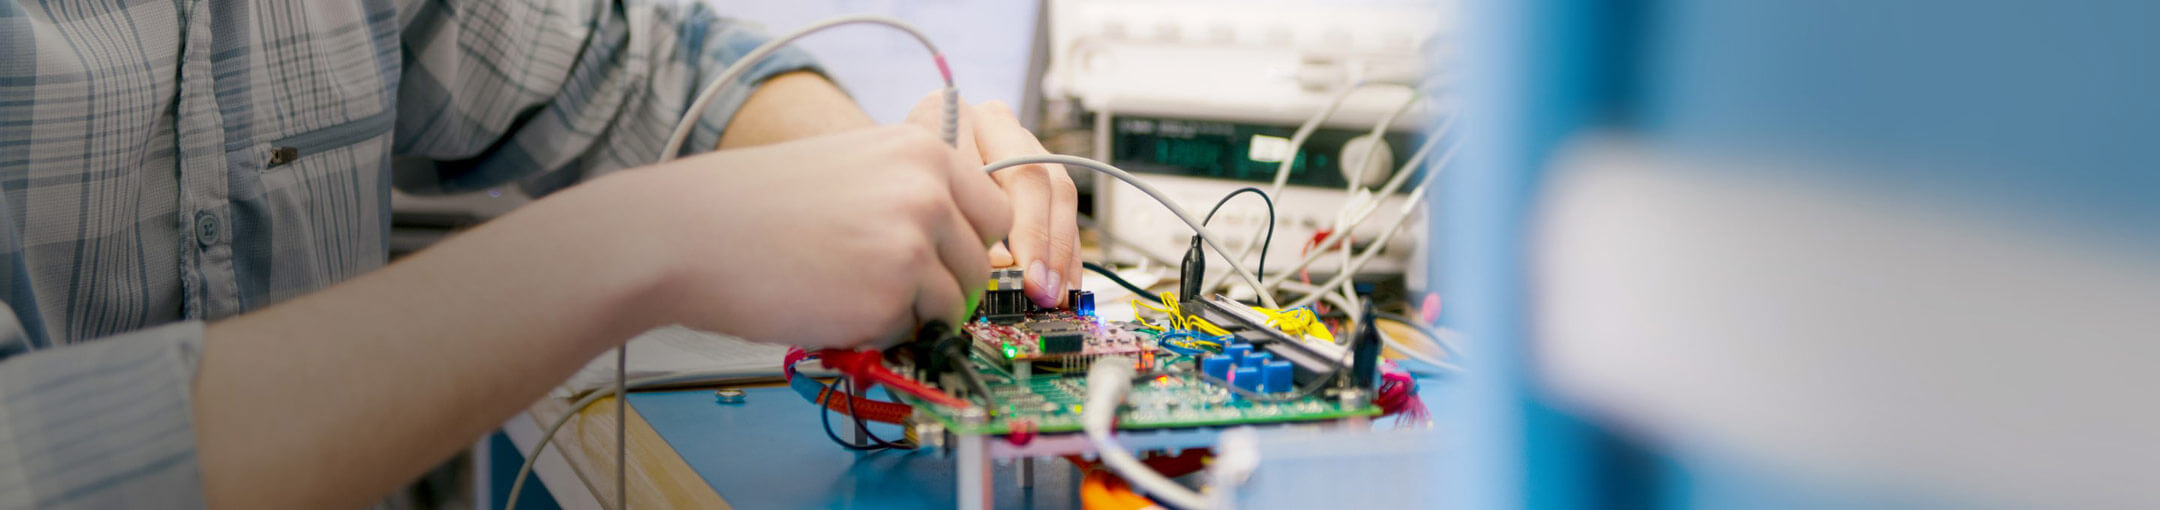 A student working on a computer motherboard.